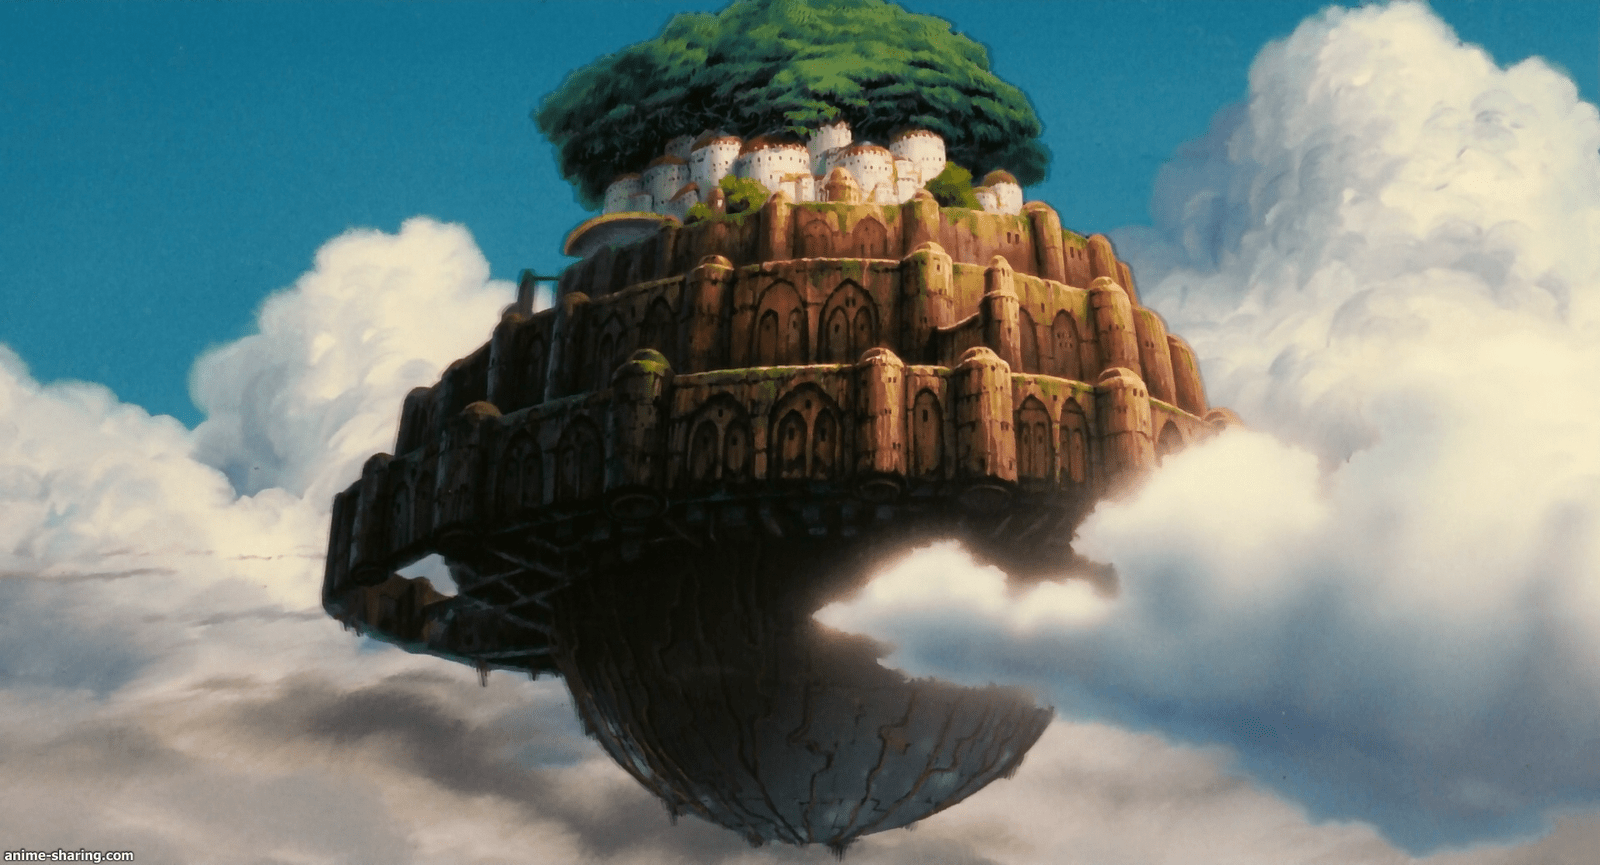 CASTLE IN THE SKY – THE ORIGIN OF THE STORY